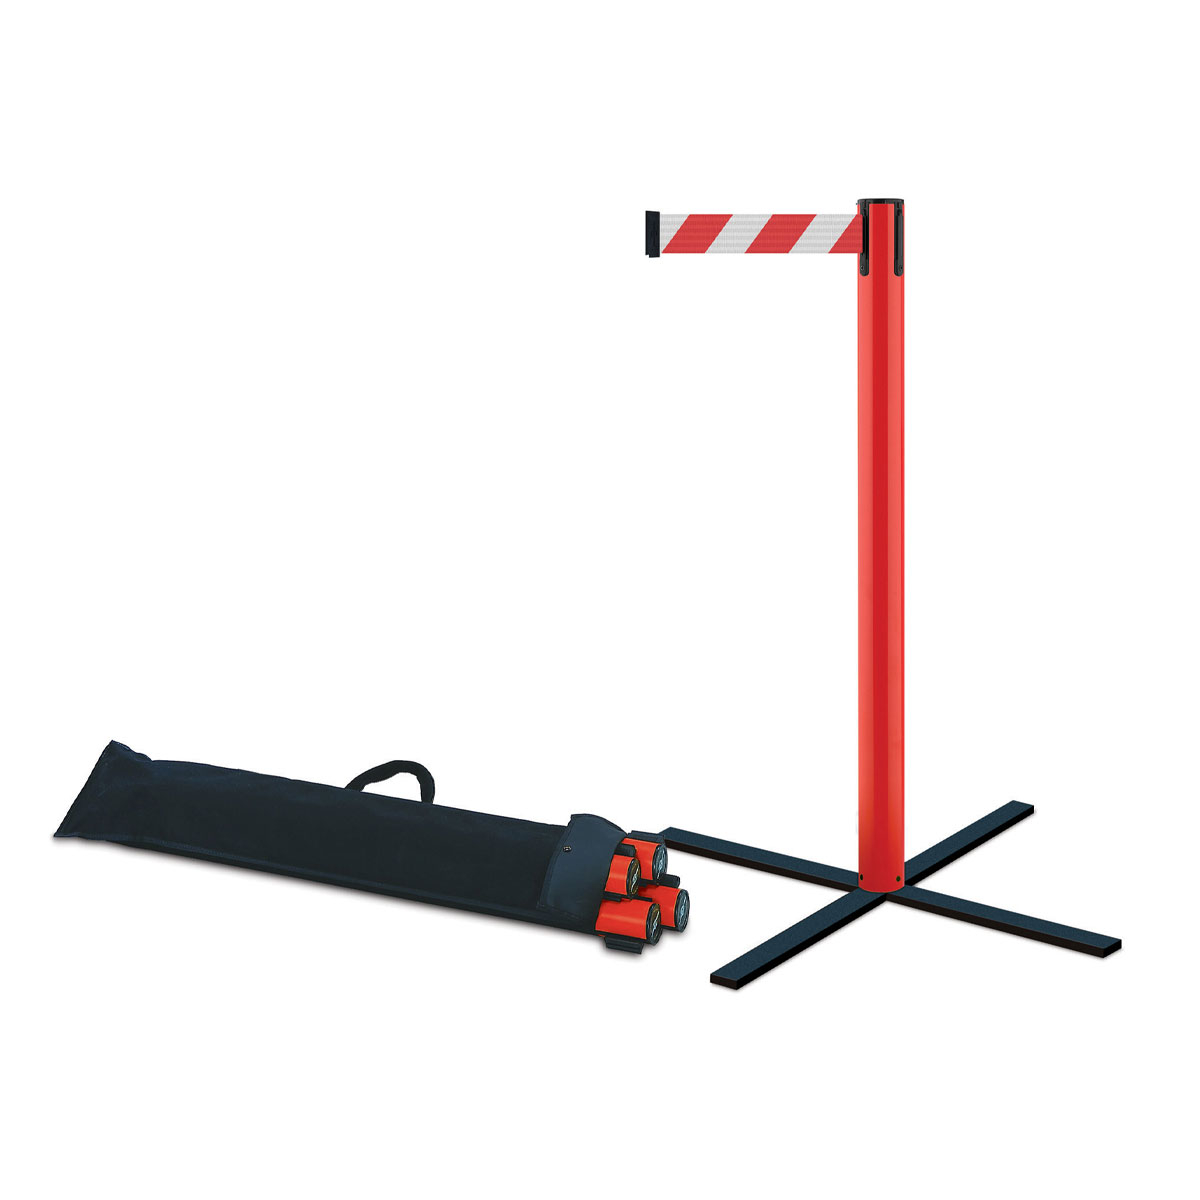 Tensabarrier® Stowaway Portable Safety Barrier KIT - Includes Four Folding Stanchions With A Carry Bag - Also Available As Single Posts